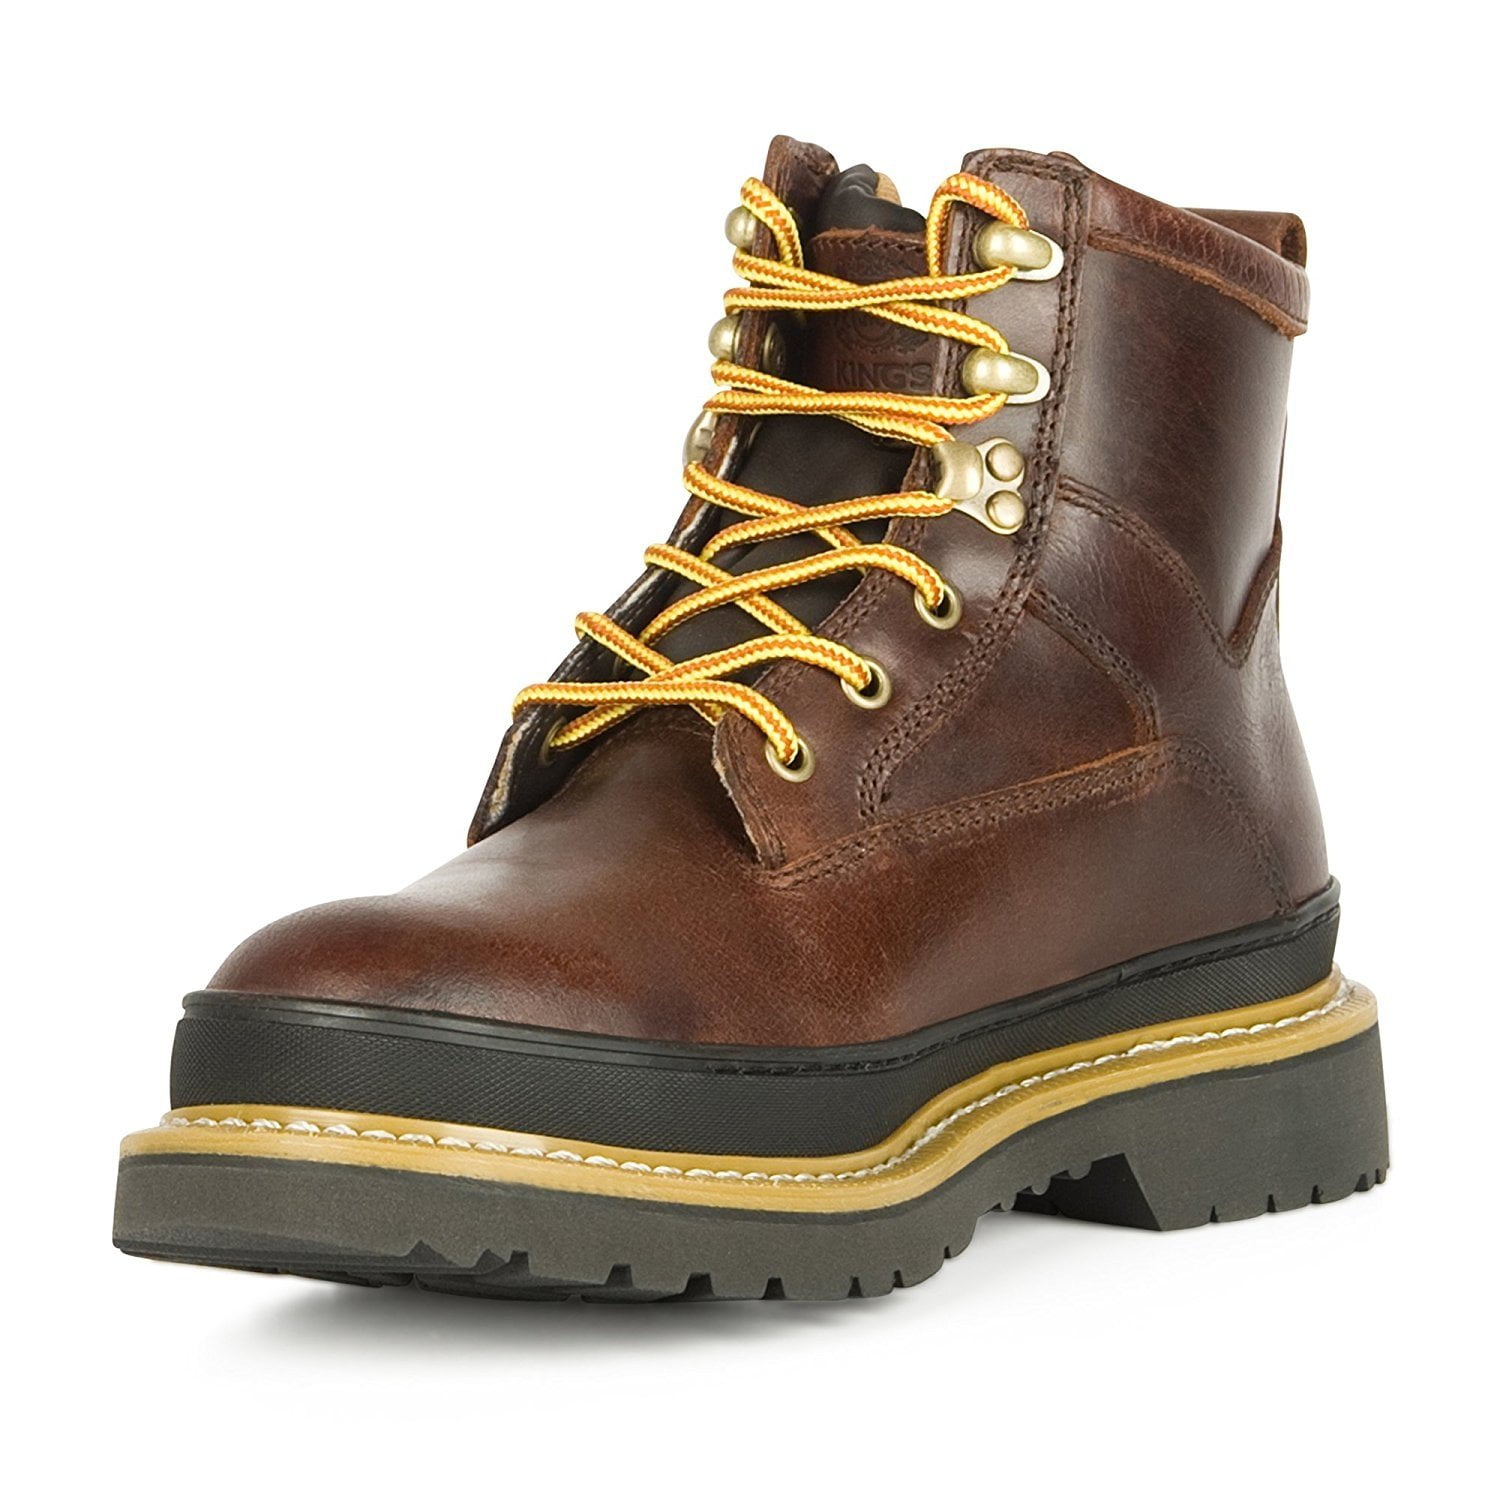 king's by honeywell kgeo2 steel toe goodyear welted leather work boot